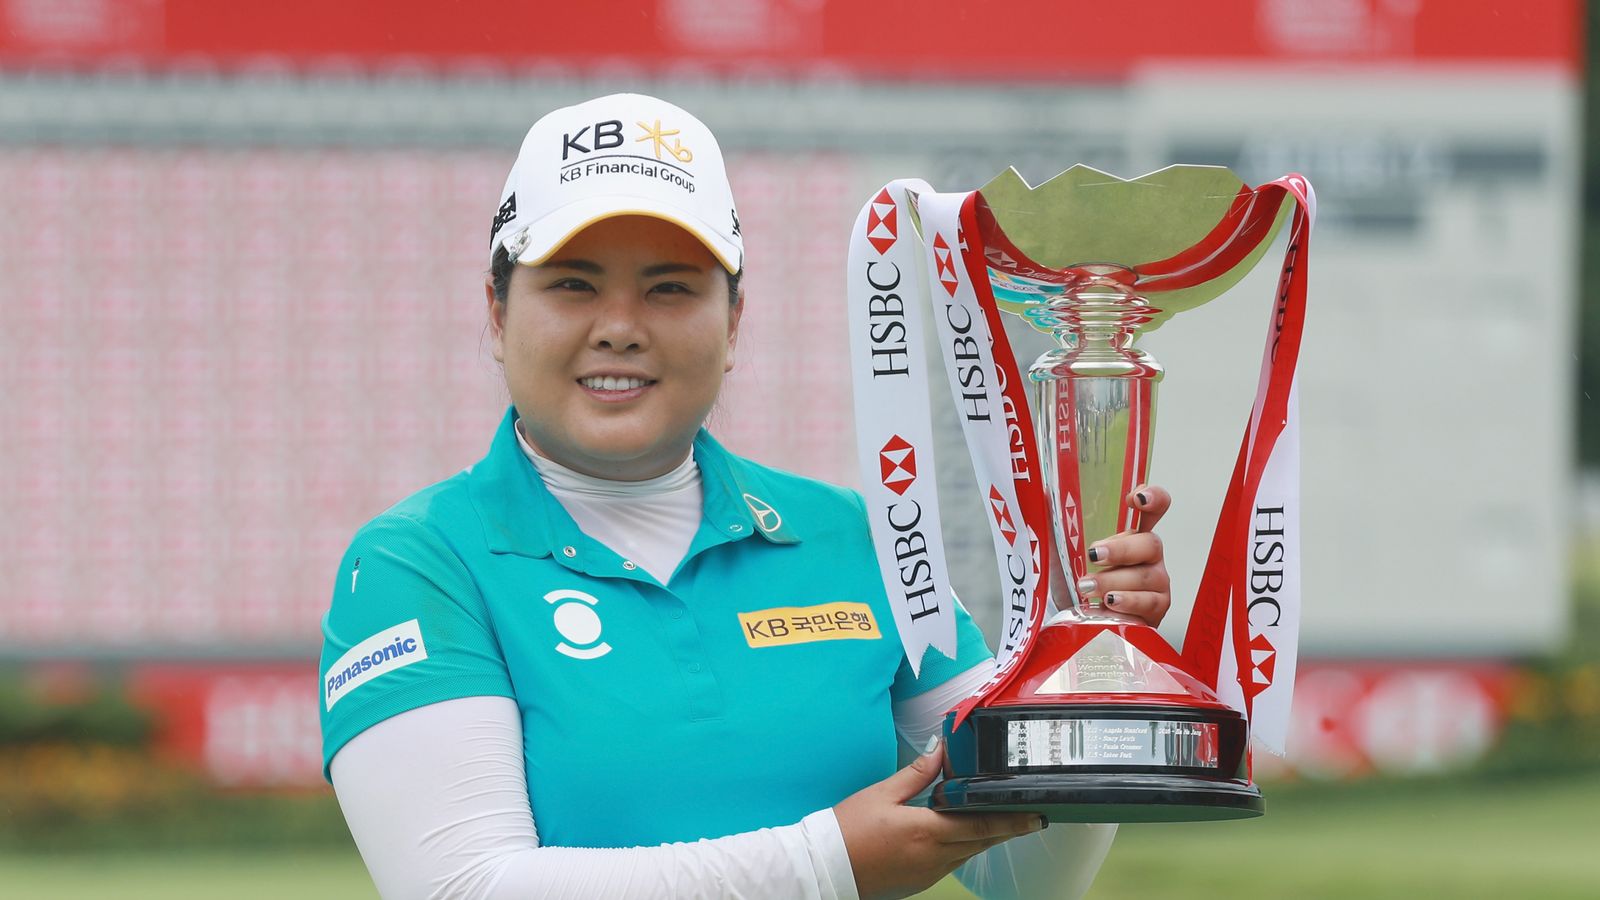 Inbee Park claims HSBC Women's Champions tournament in Singapore | Golf ...